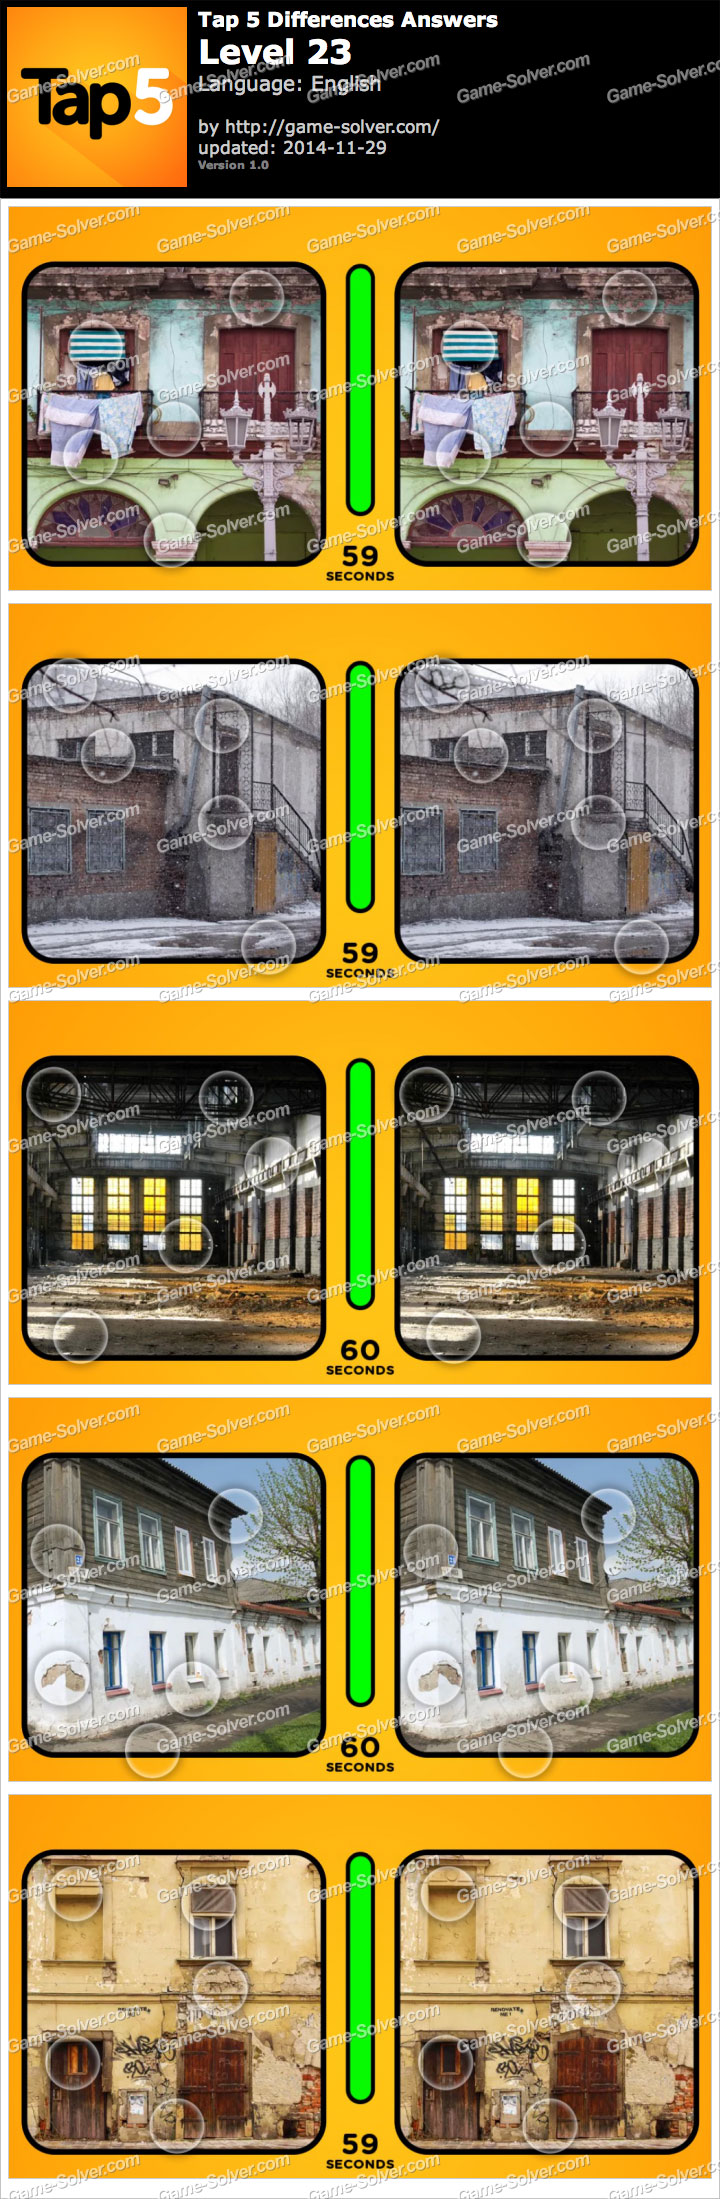 5 differences online cheat level 24 round 3